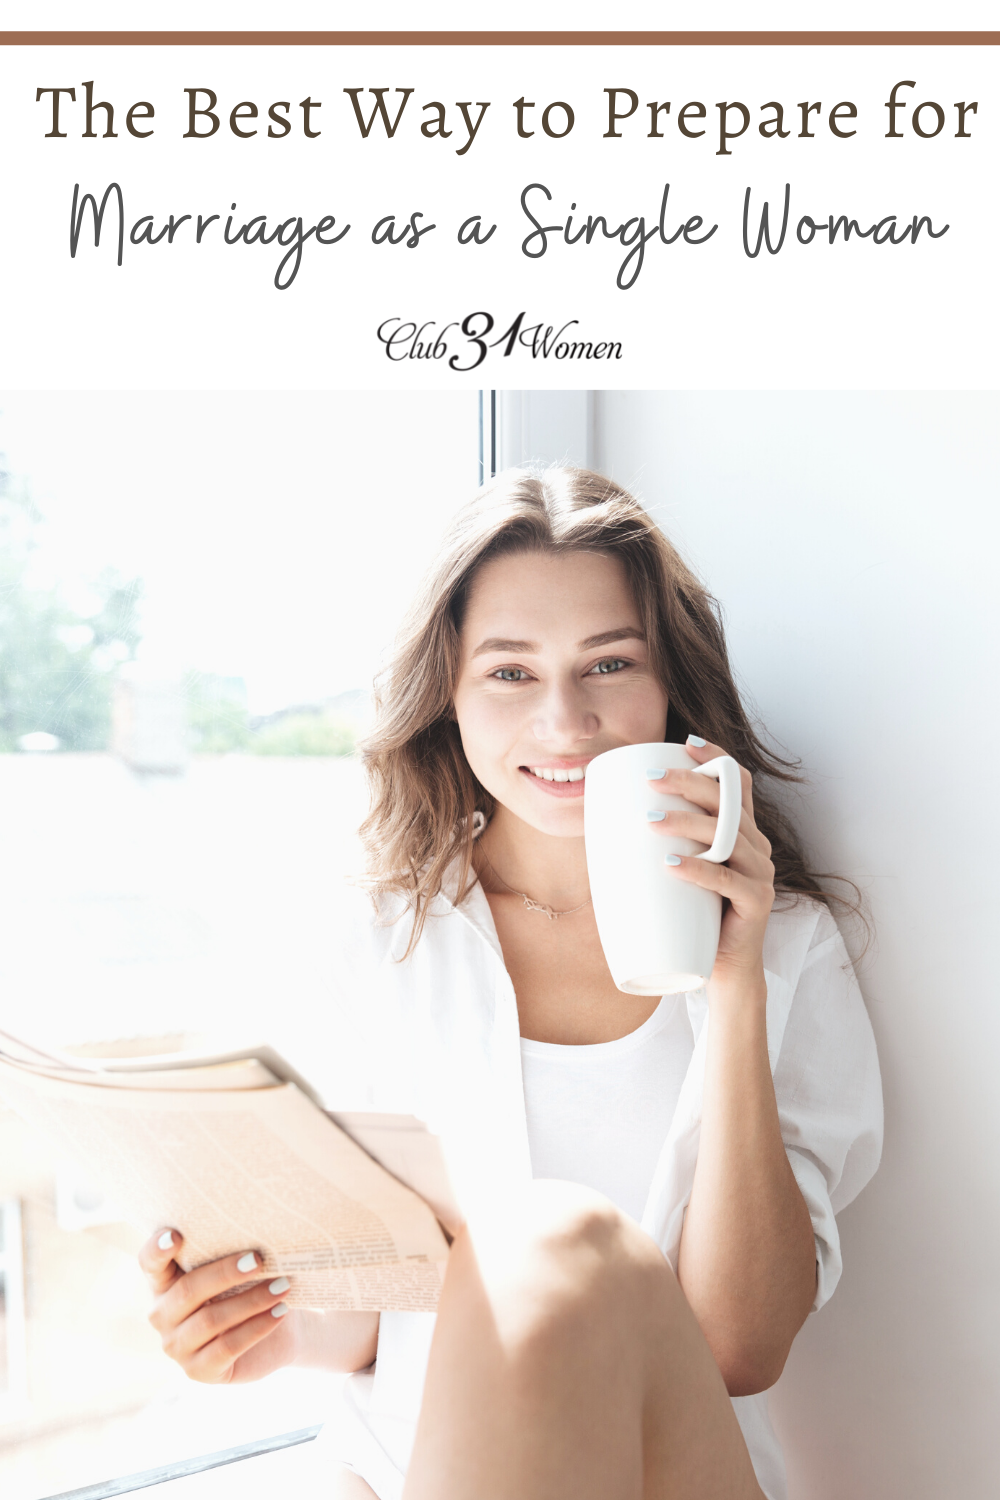 There are some wonderfully fruitful ways to prepare for marriage as a single woman. Preparing now can help you in your marriage later. via @Club31Women